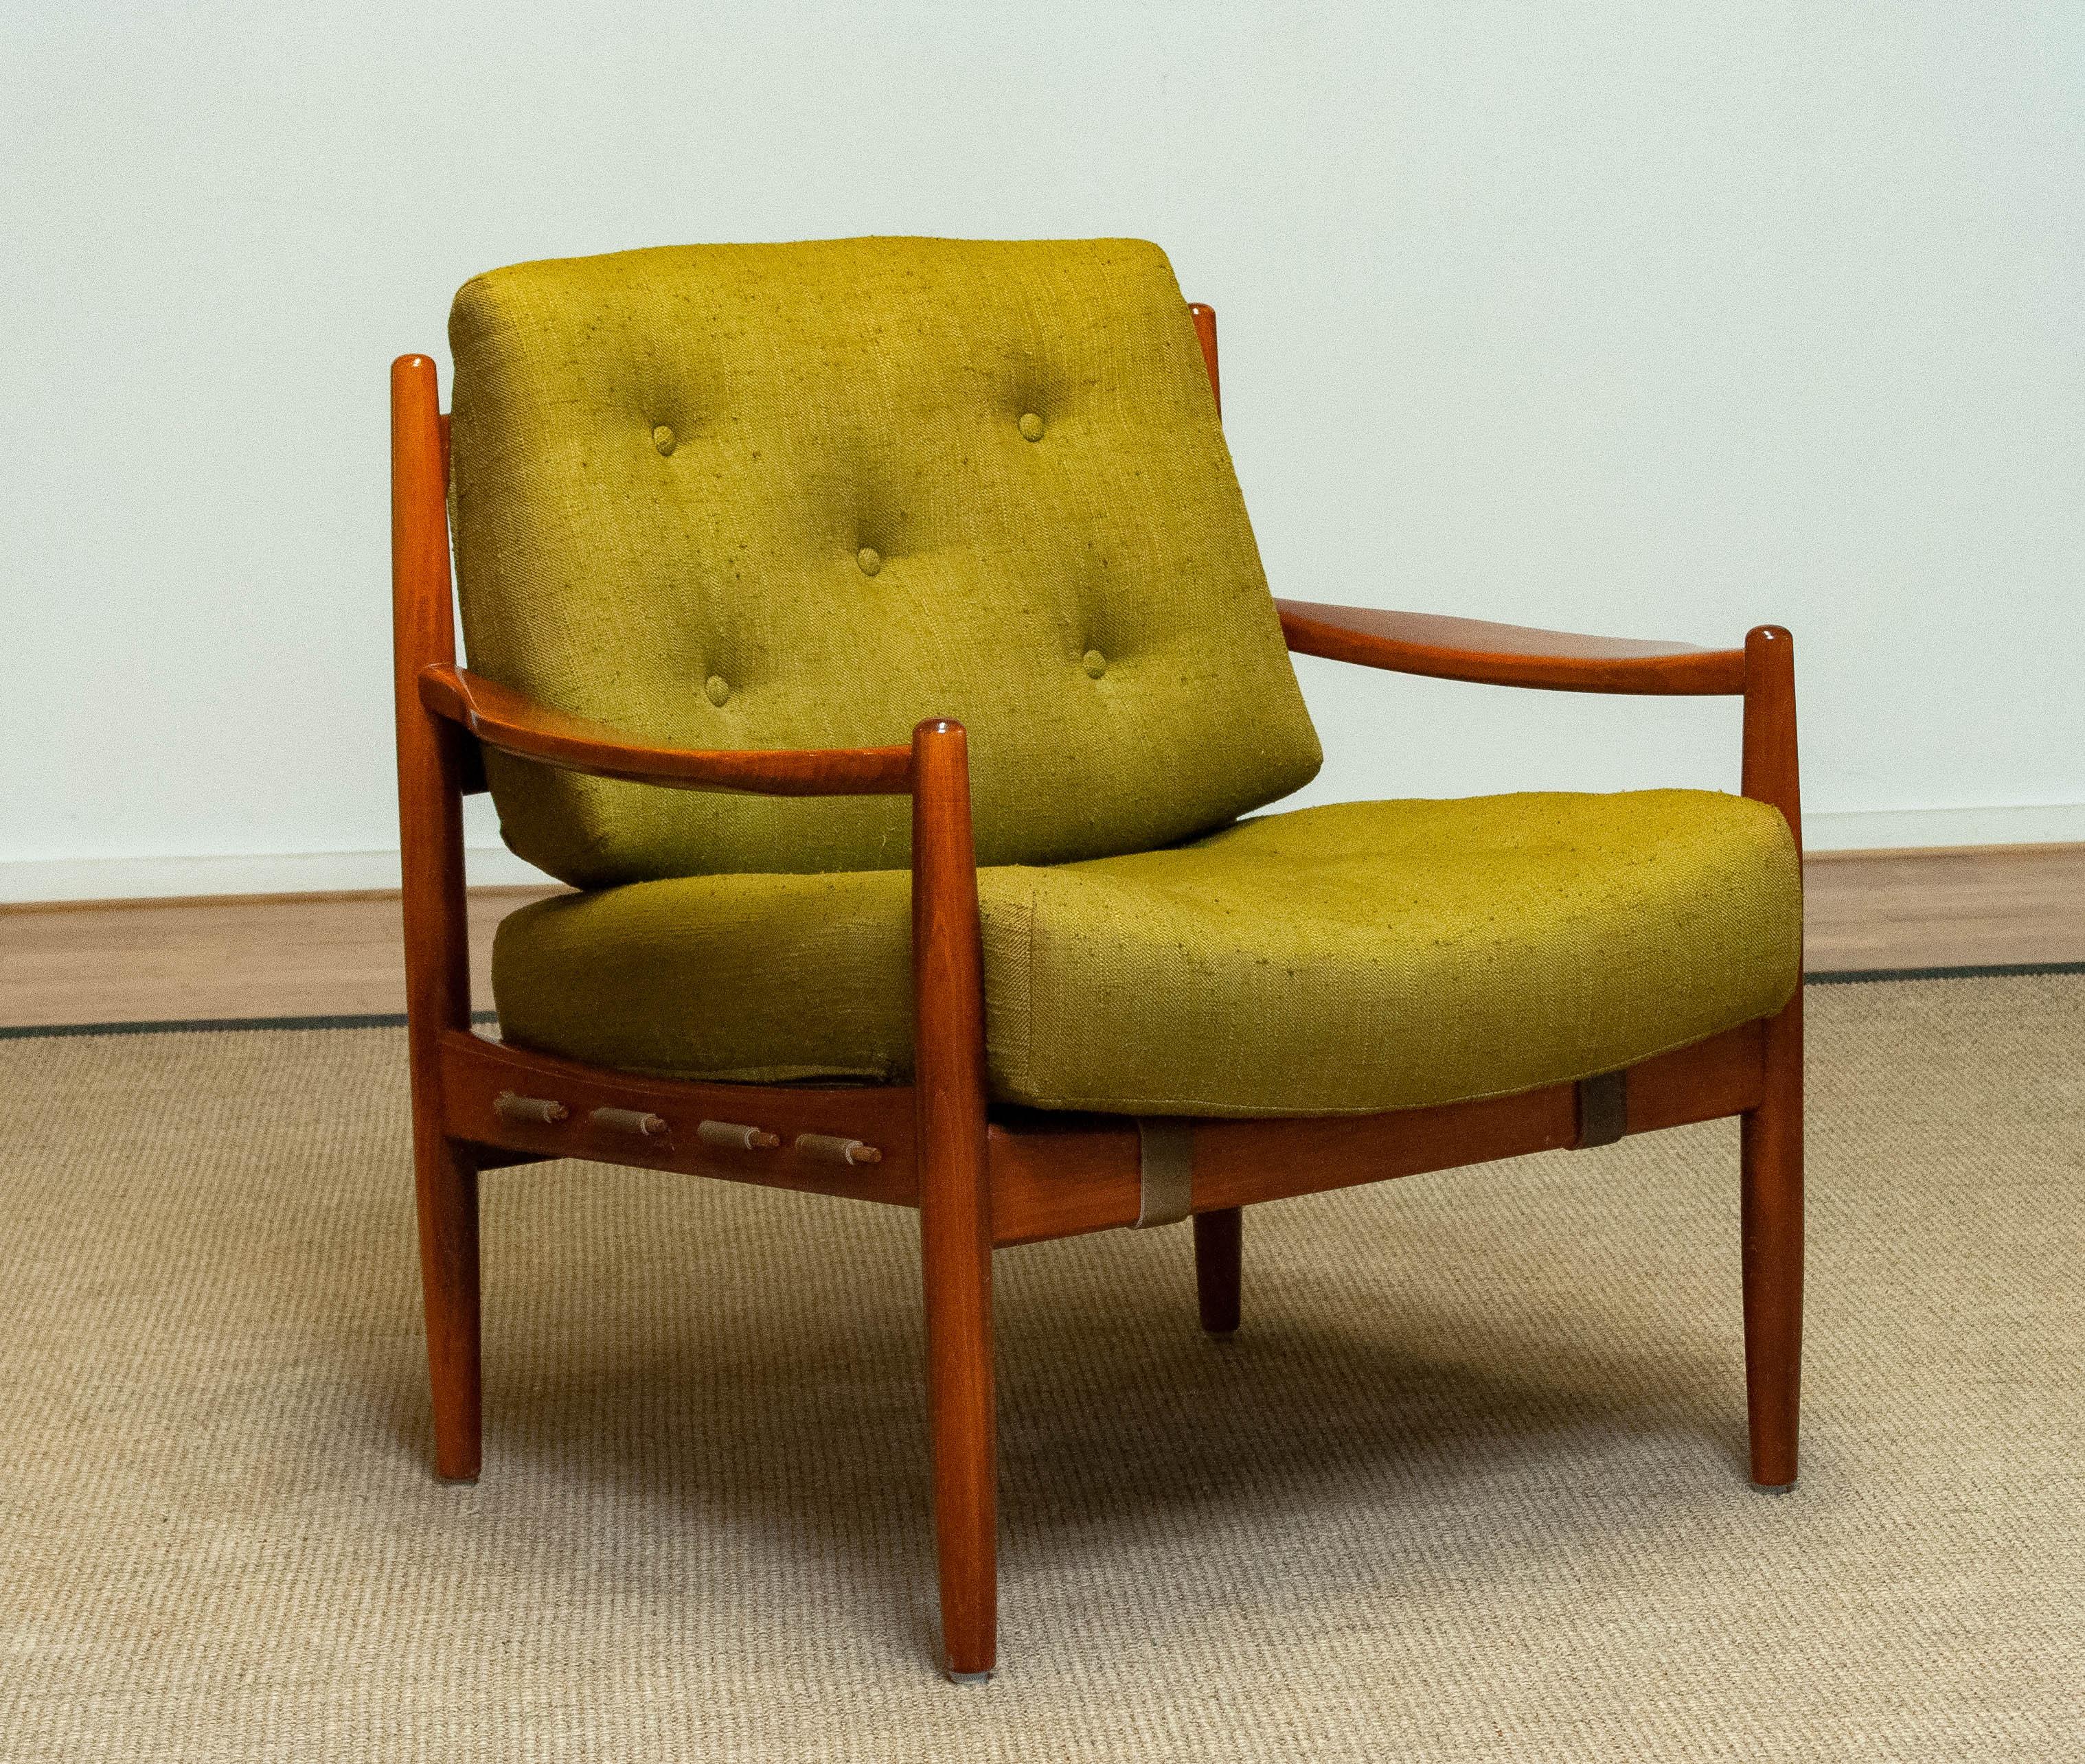 1960's Green Linen 'Läckö' Lounge Chair by Ingemar Thillmark for OPE Sweden For Sale 2